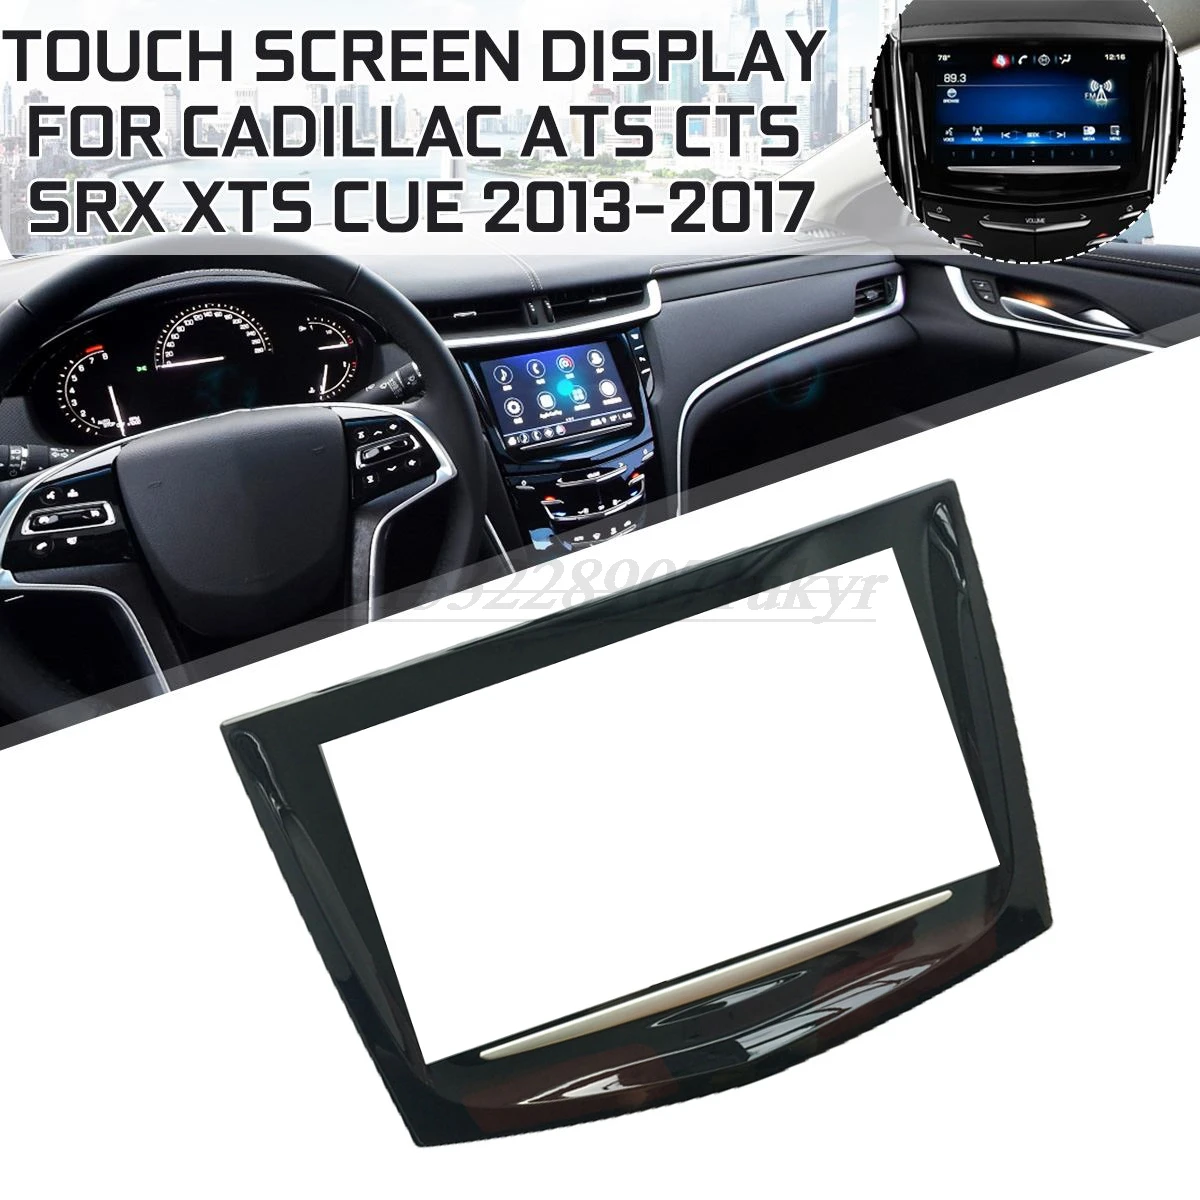 New CUE Touch Screen for Cadillac 2013 2014 2015 2016 2017 Cadillac Escalade XTS ATS CTS SRX CUE TouchSense Replacement 